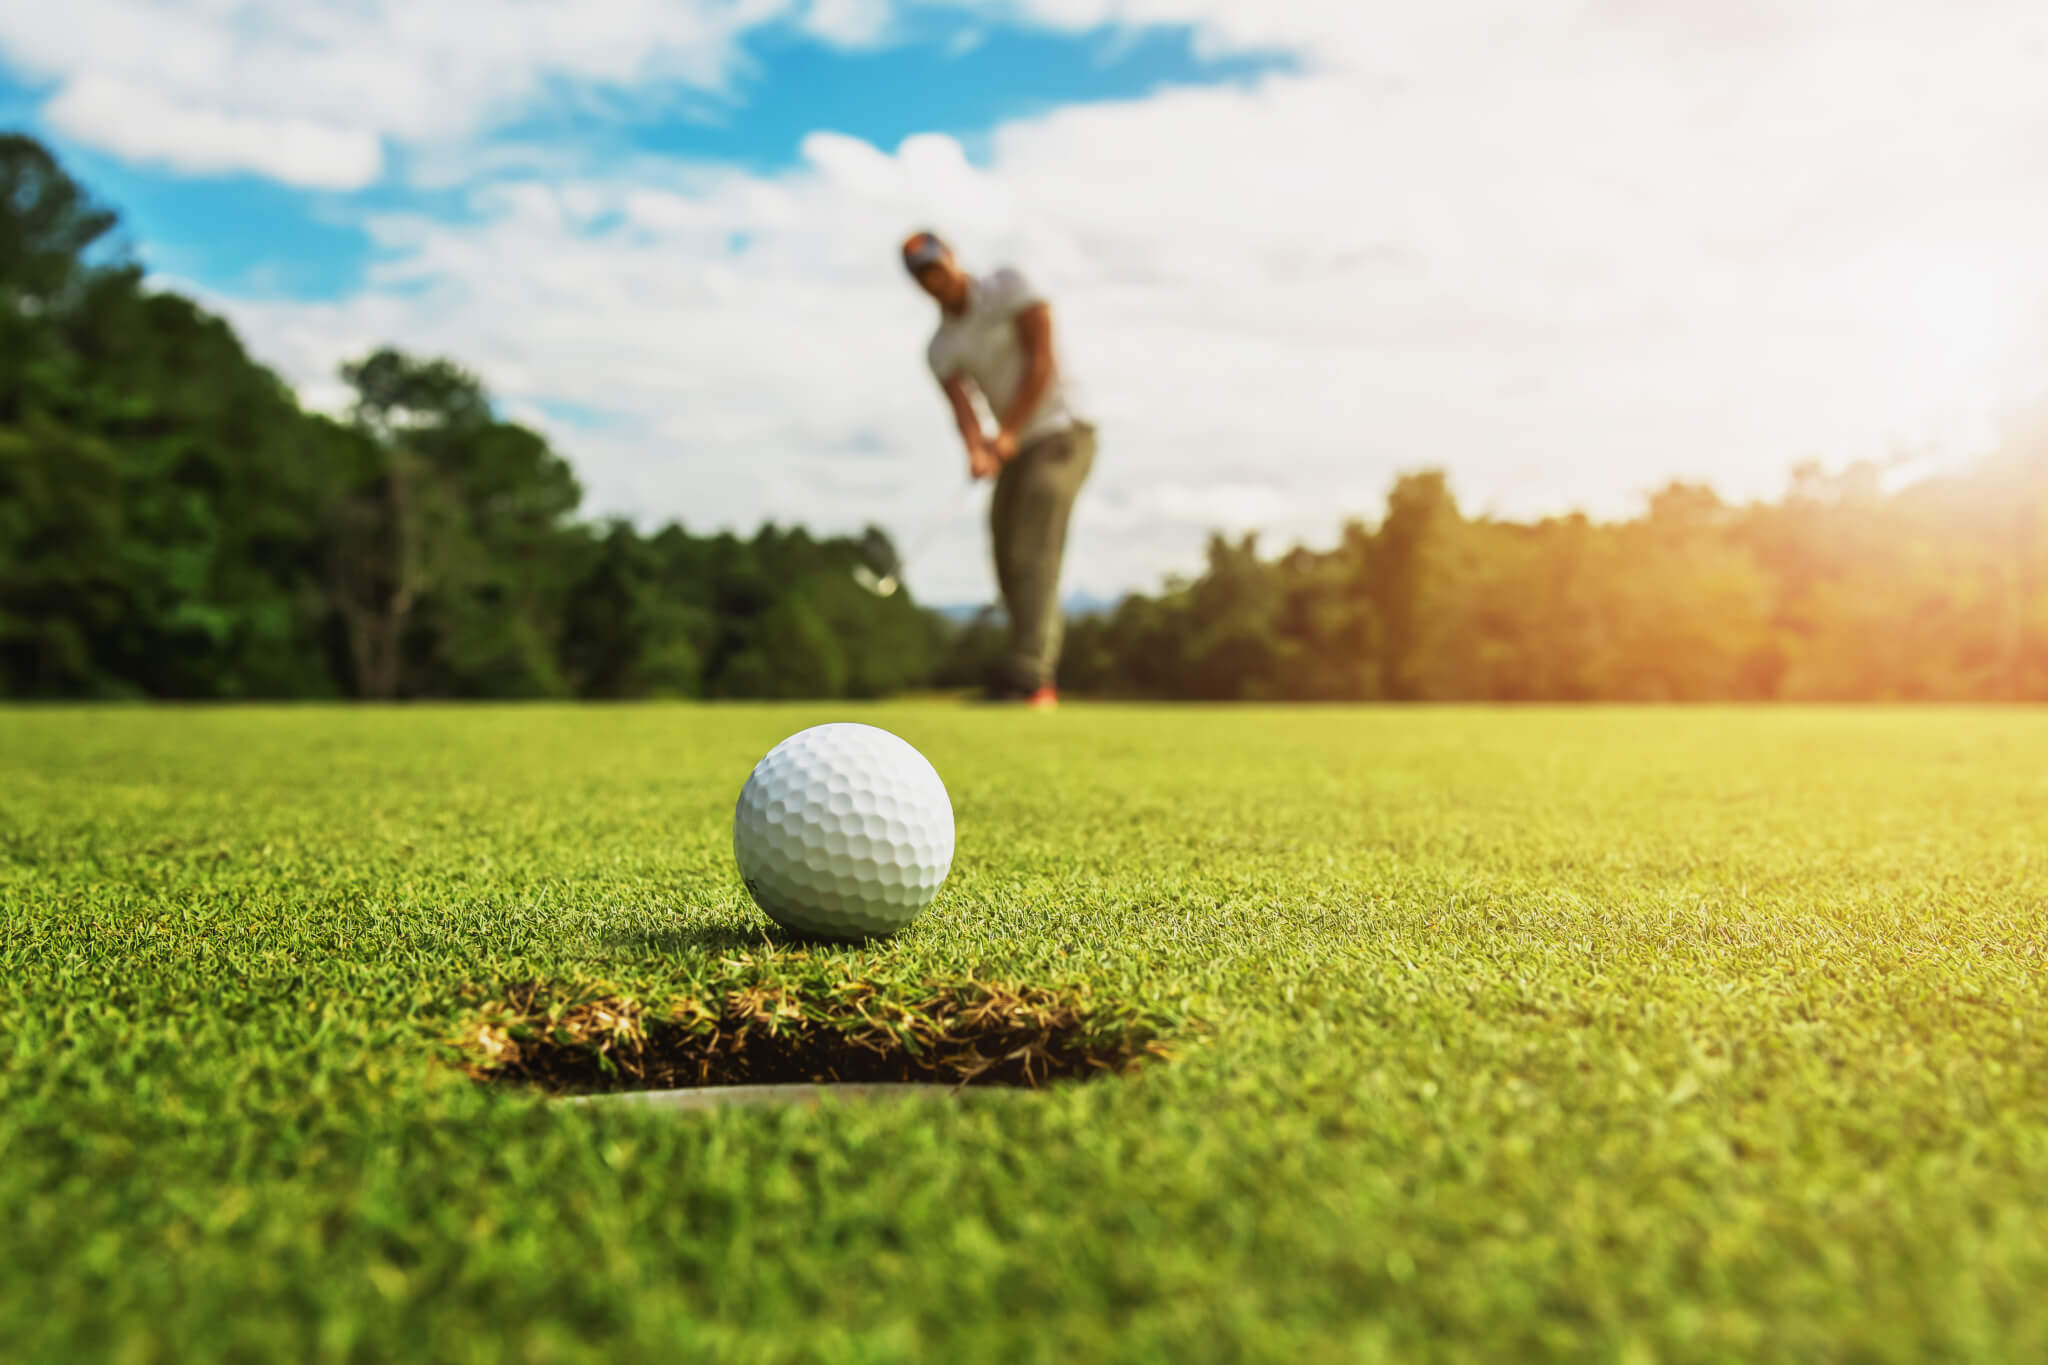 Hit the links: Playing golf just once a month may lower risk of death in older adults - Study Finds